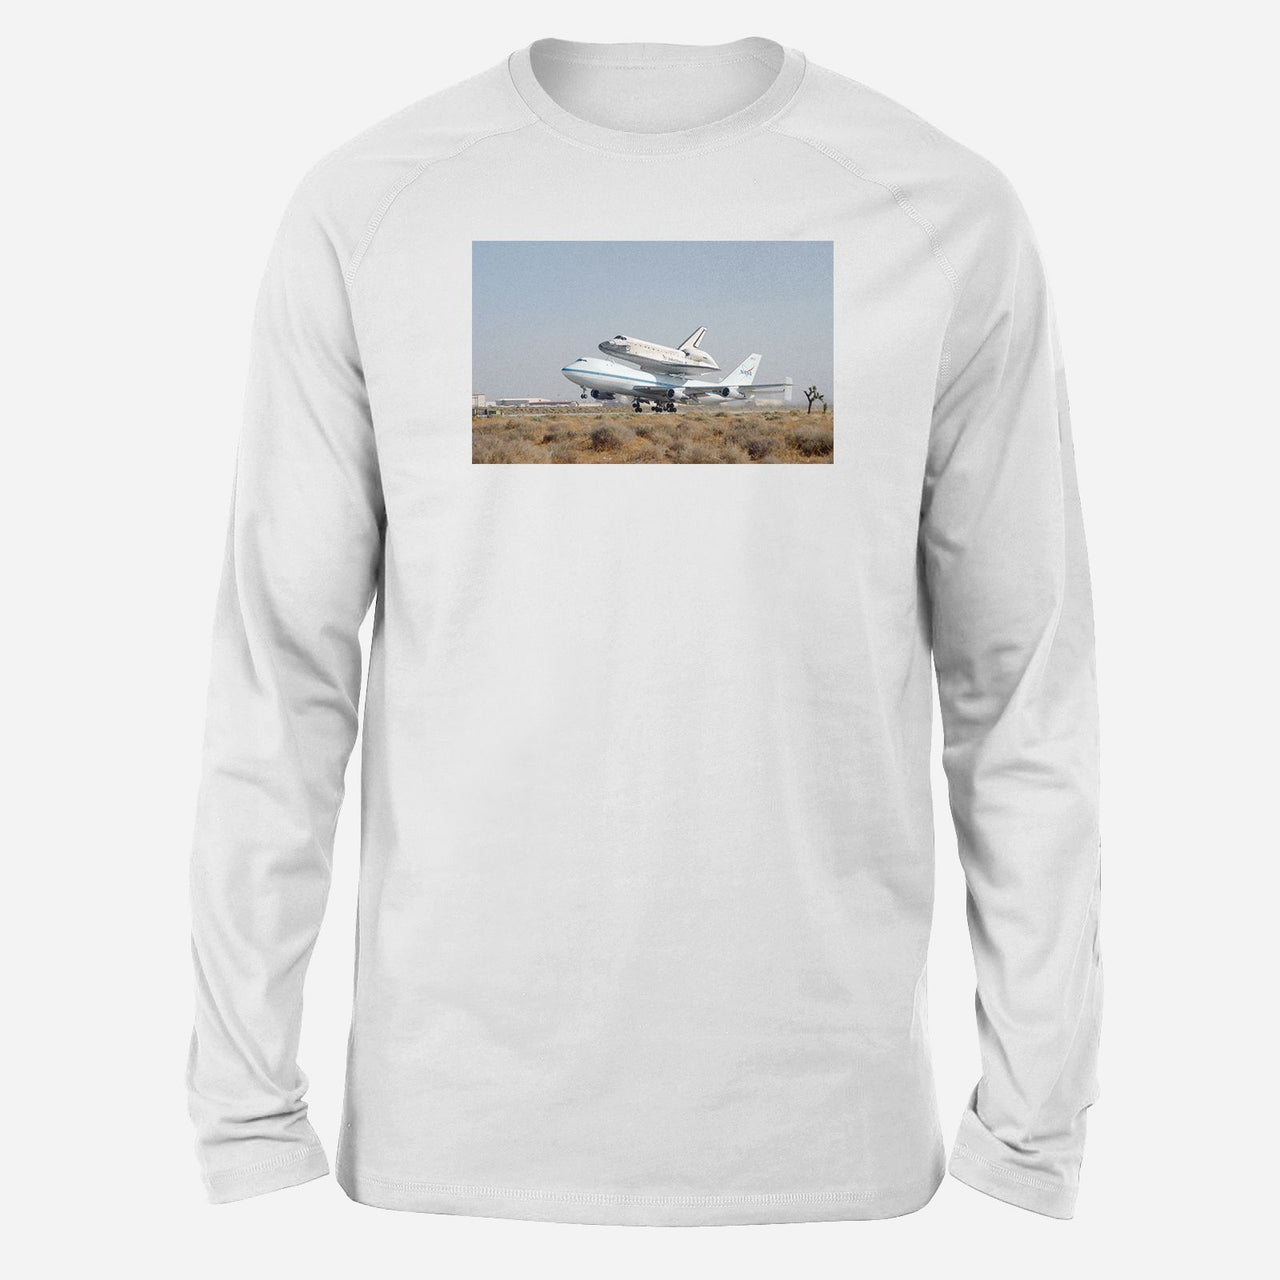 Boeing 747 Carrying Nasa's Space Shuttle Designed Long-Sleeve T-Shirts